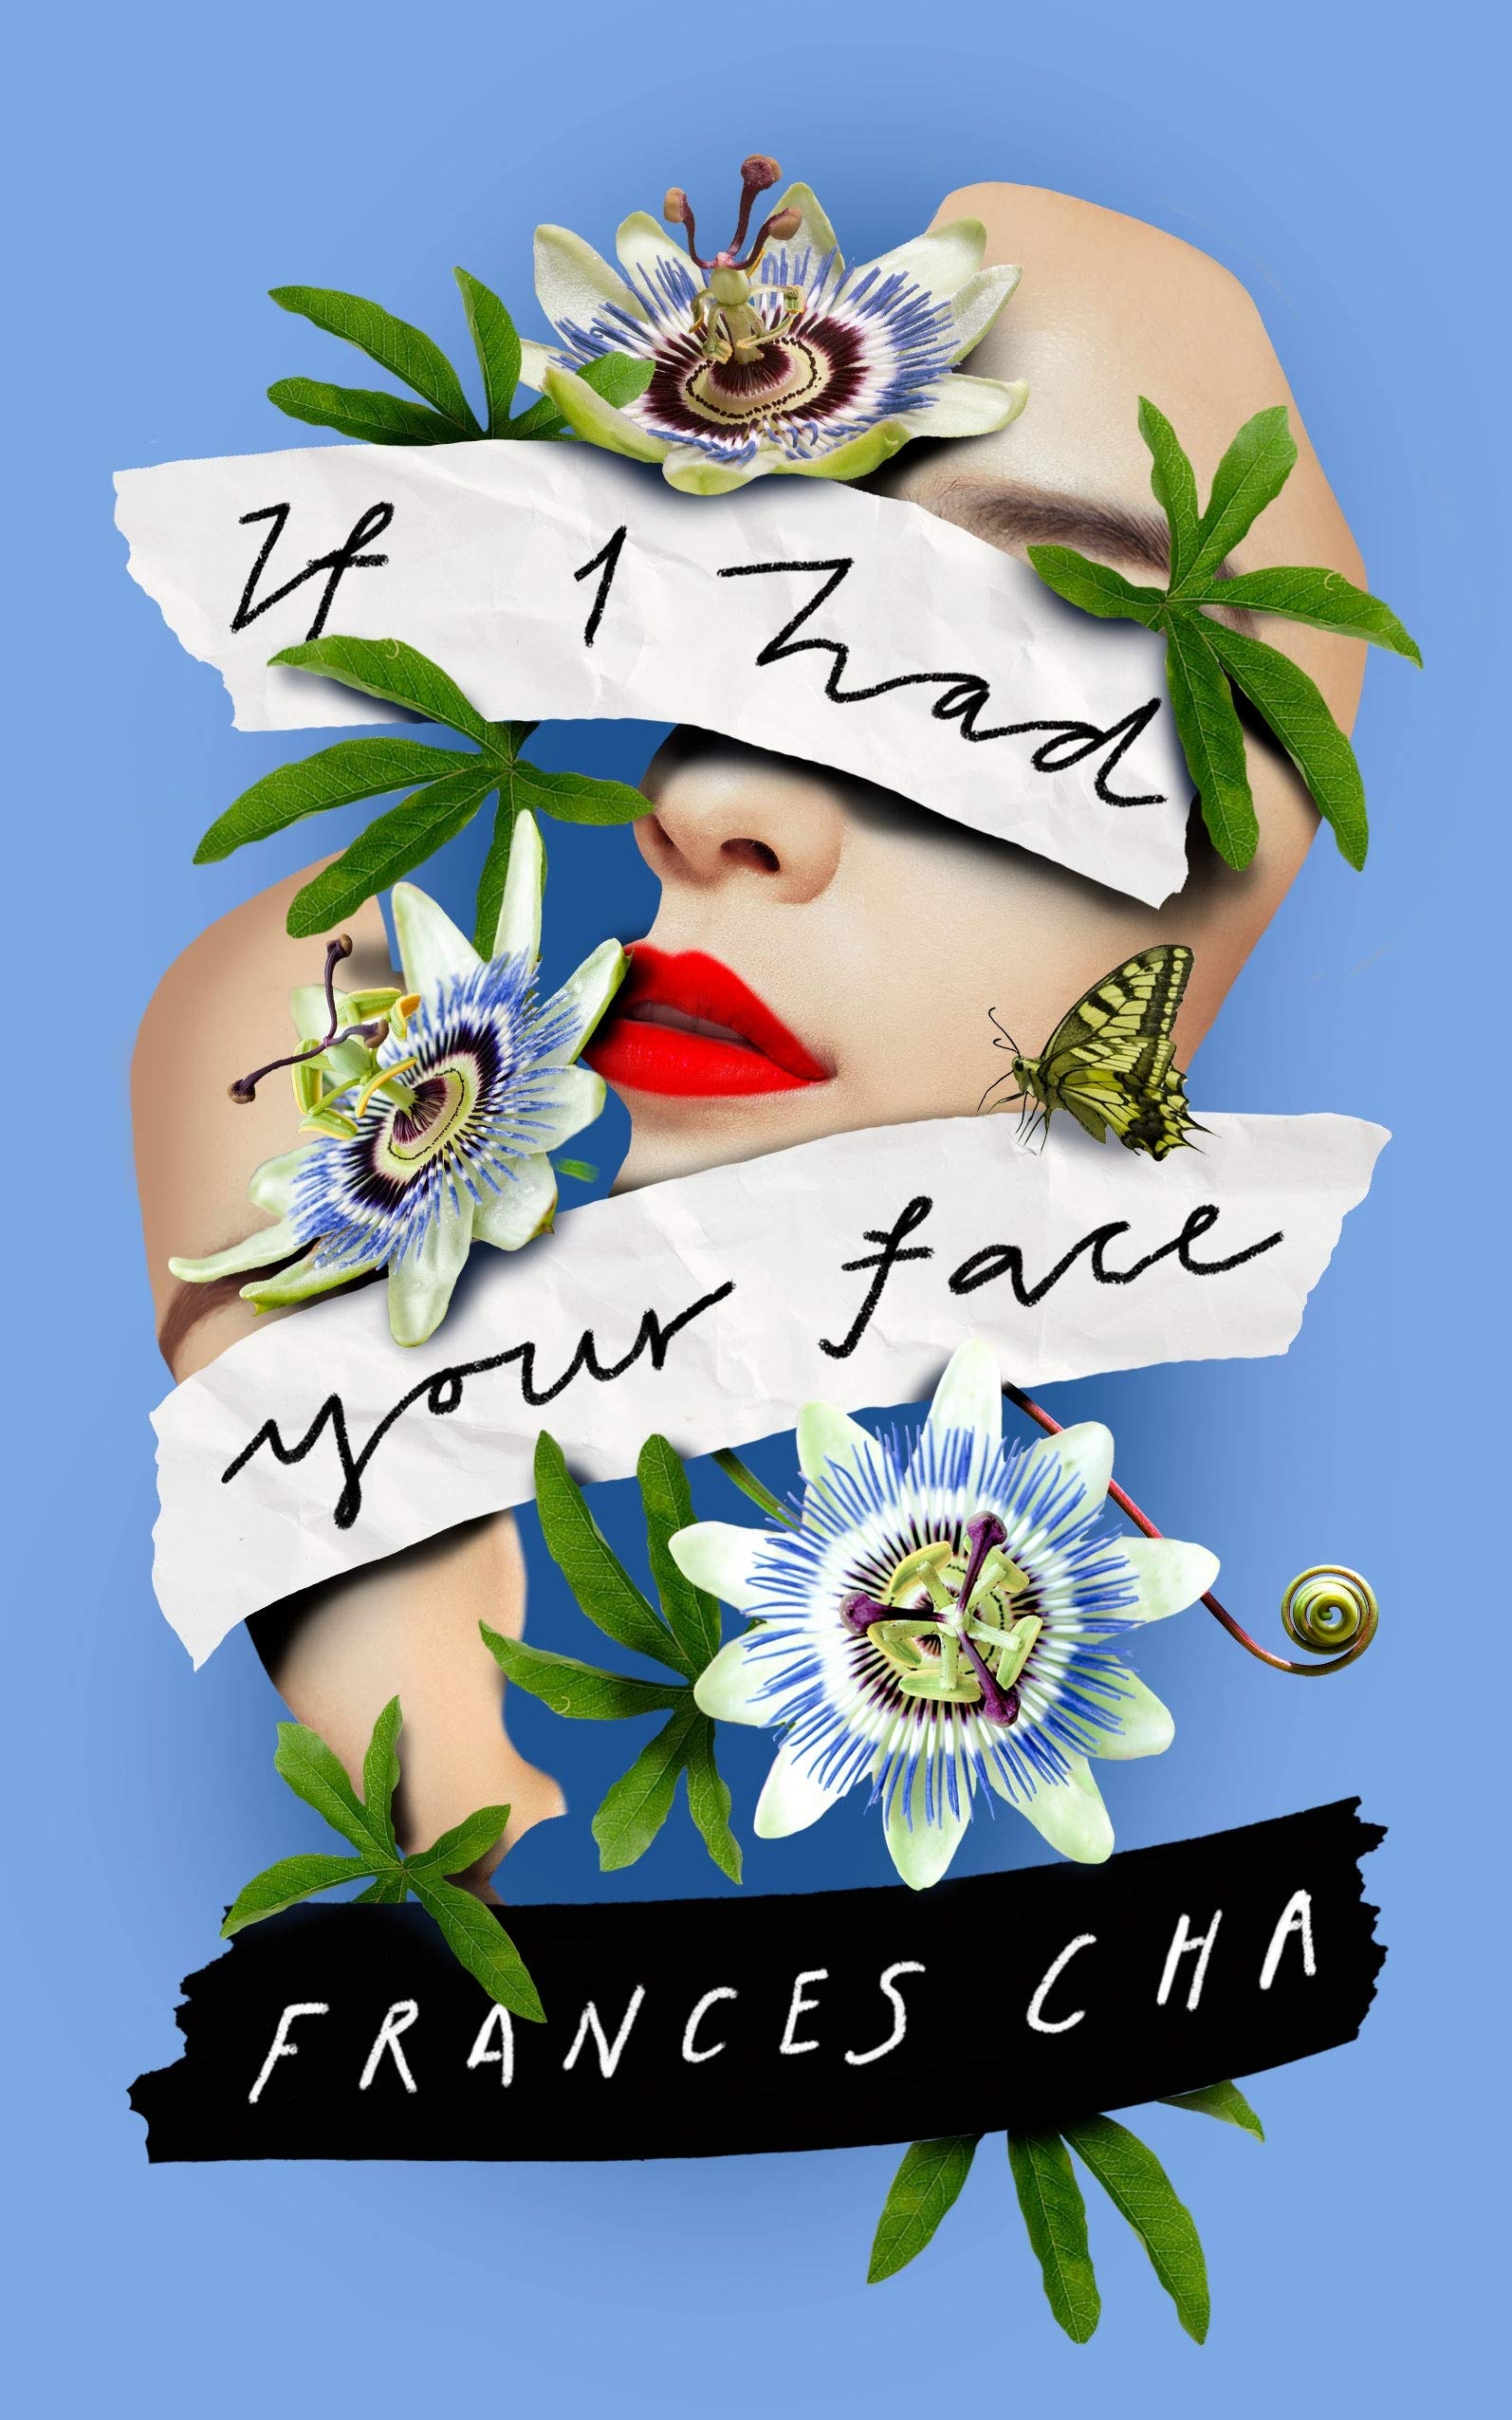 If I Had Your Face cover